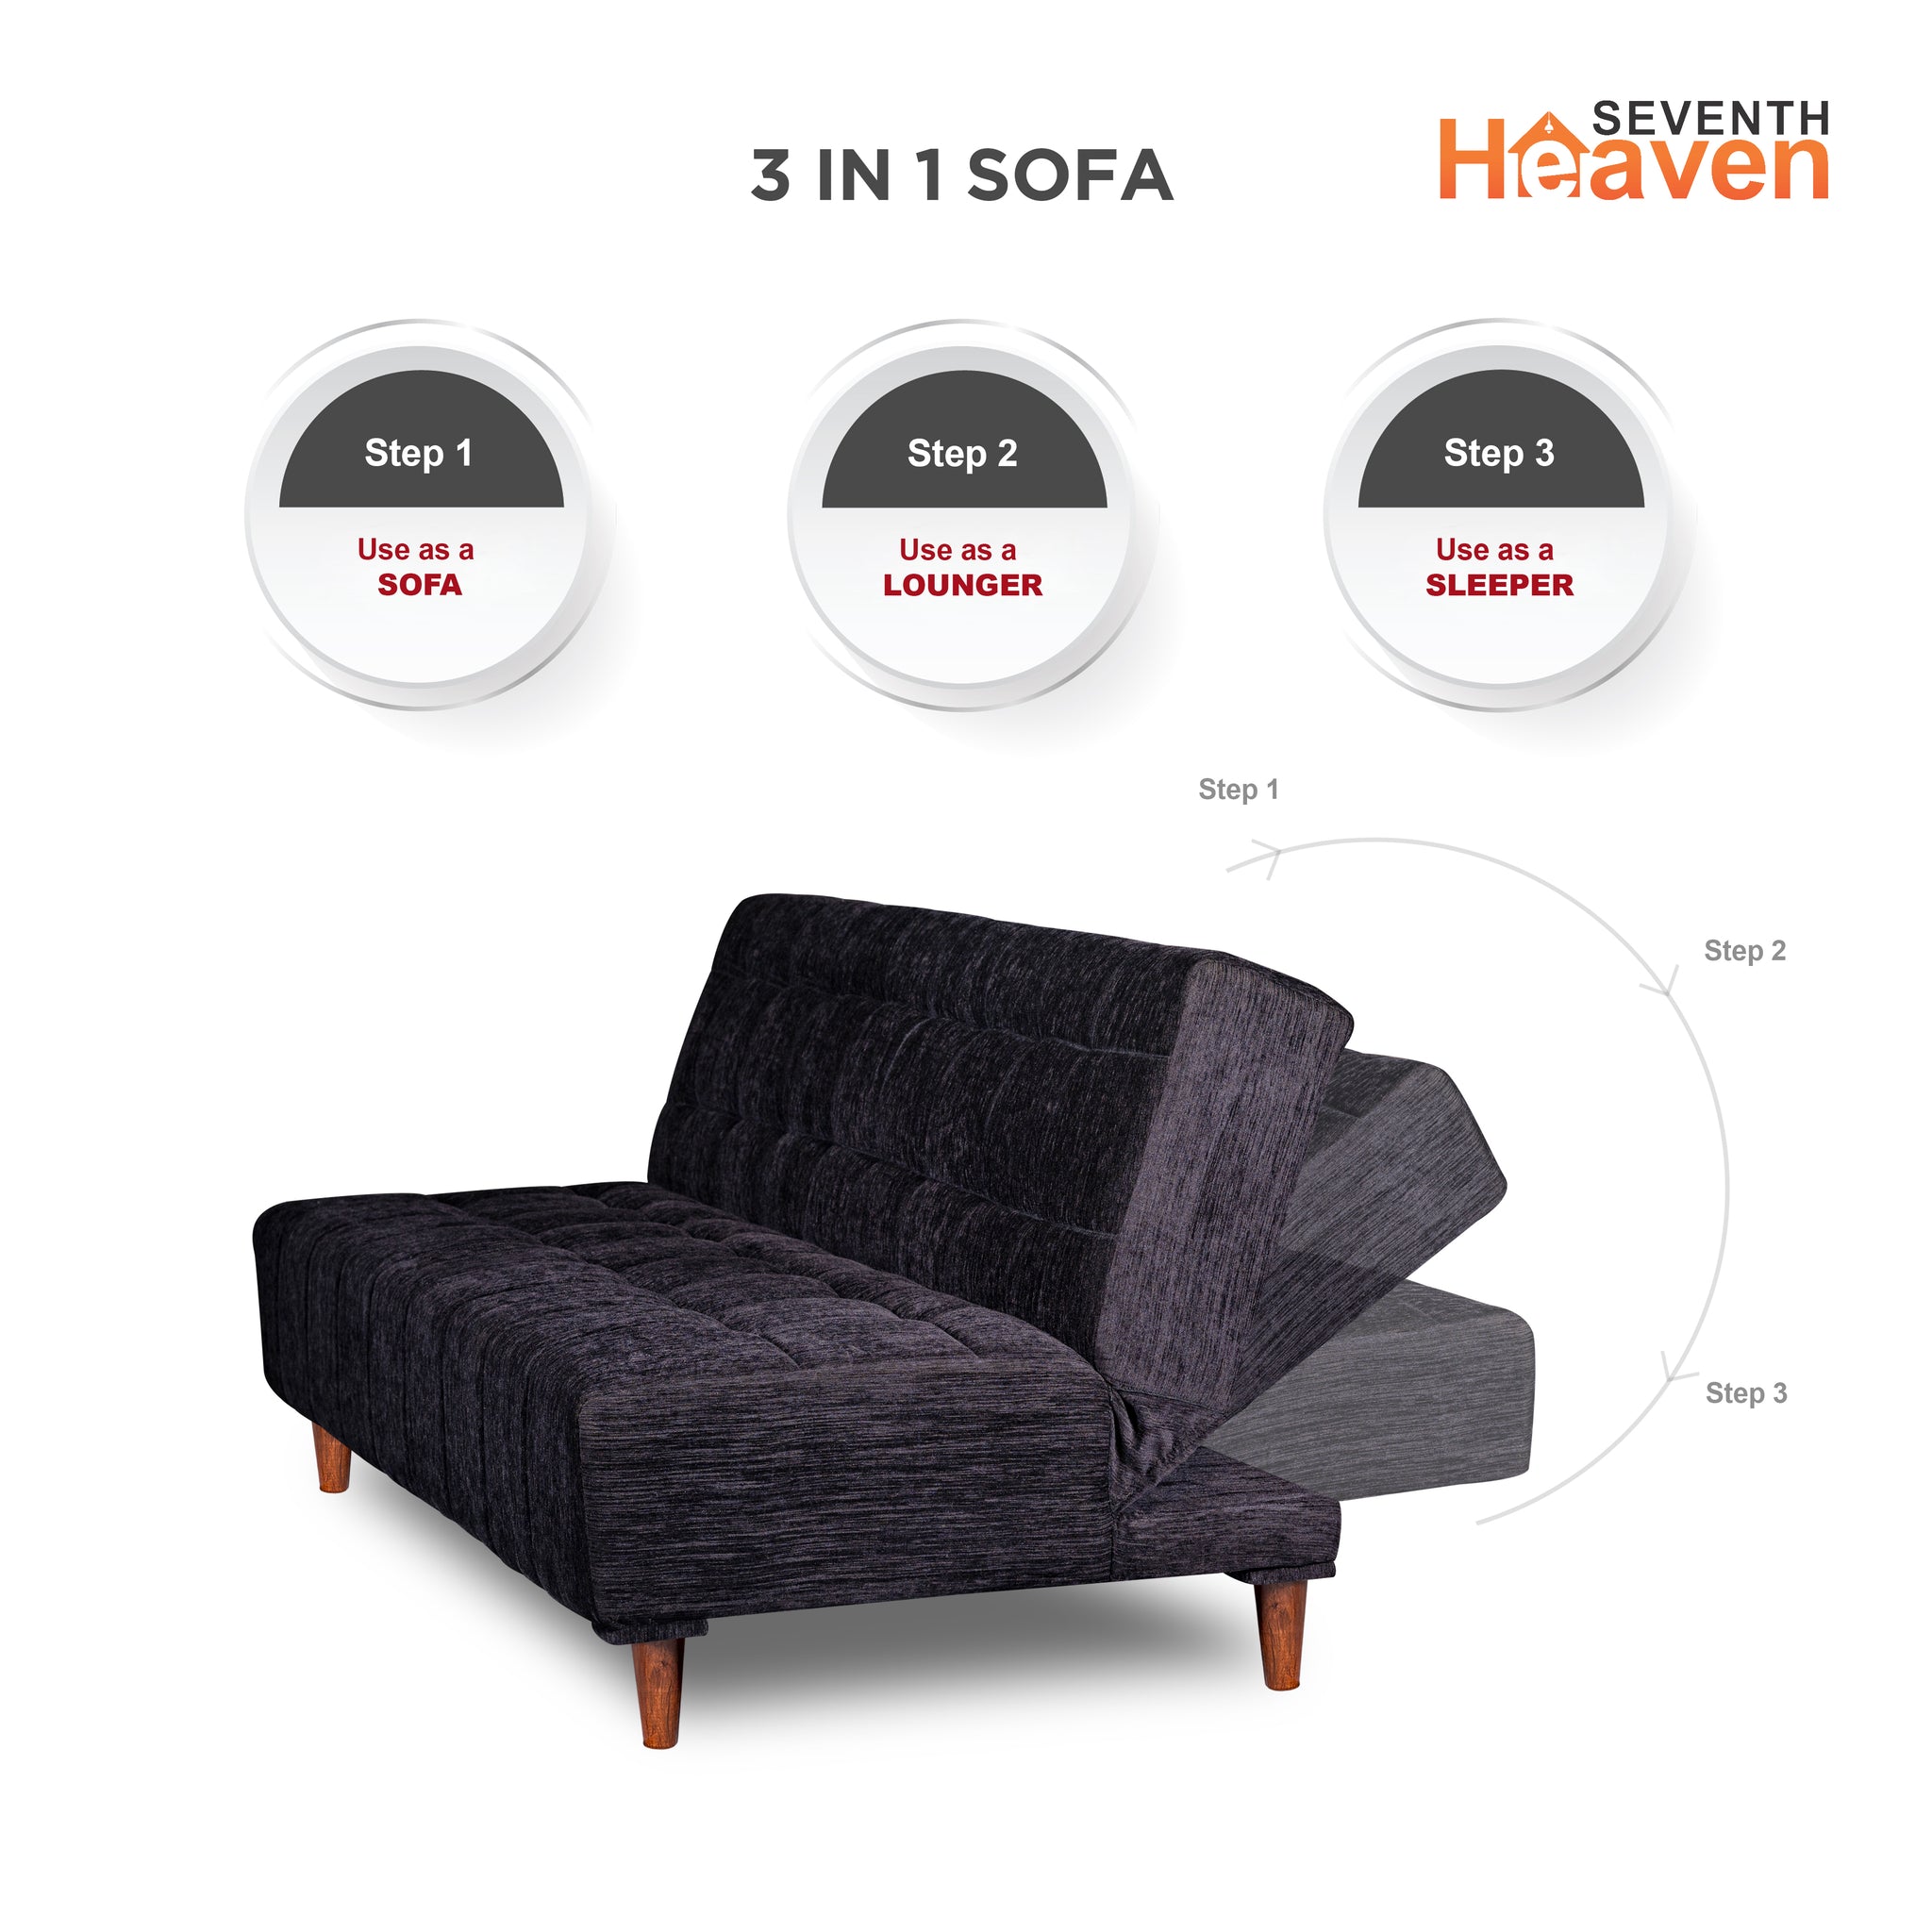 Seventh Heaven Florida 4 Seater Wooden Sofa Cum Bed. Modern & Elegant Smart Furniture Range for luxurious homes, living rooms and offices. Use as a sofa, lounger or bed. Perfect for guests. Molphino fabric with sheesham polished wooden legs. Black colour.